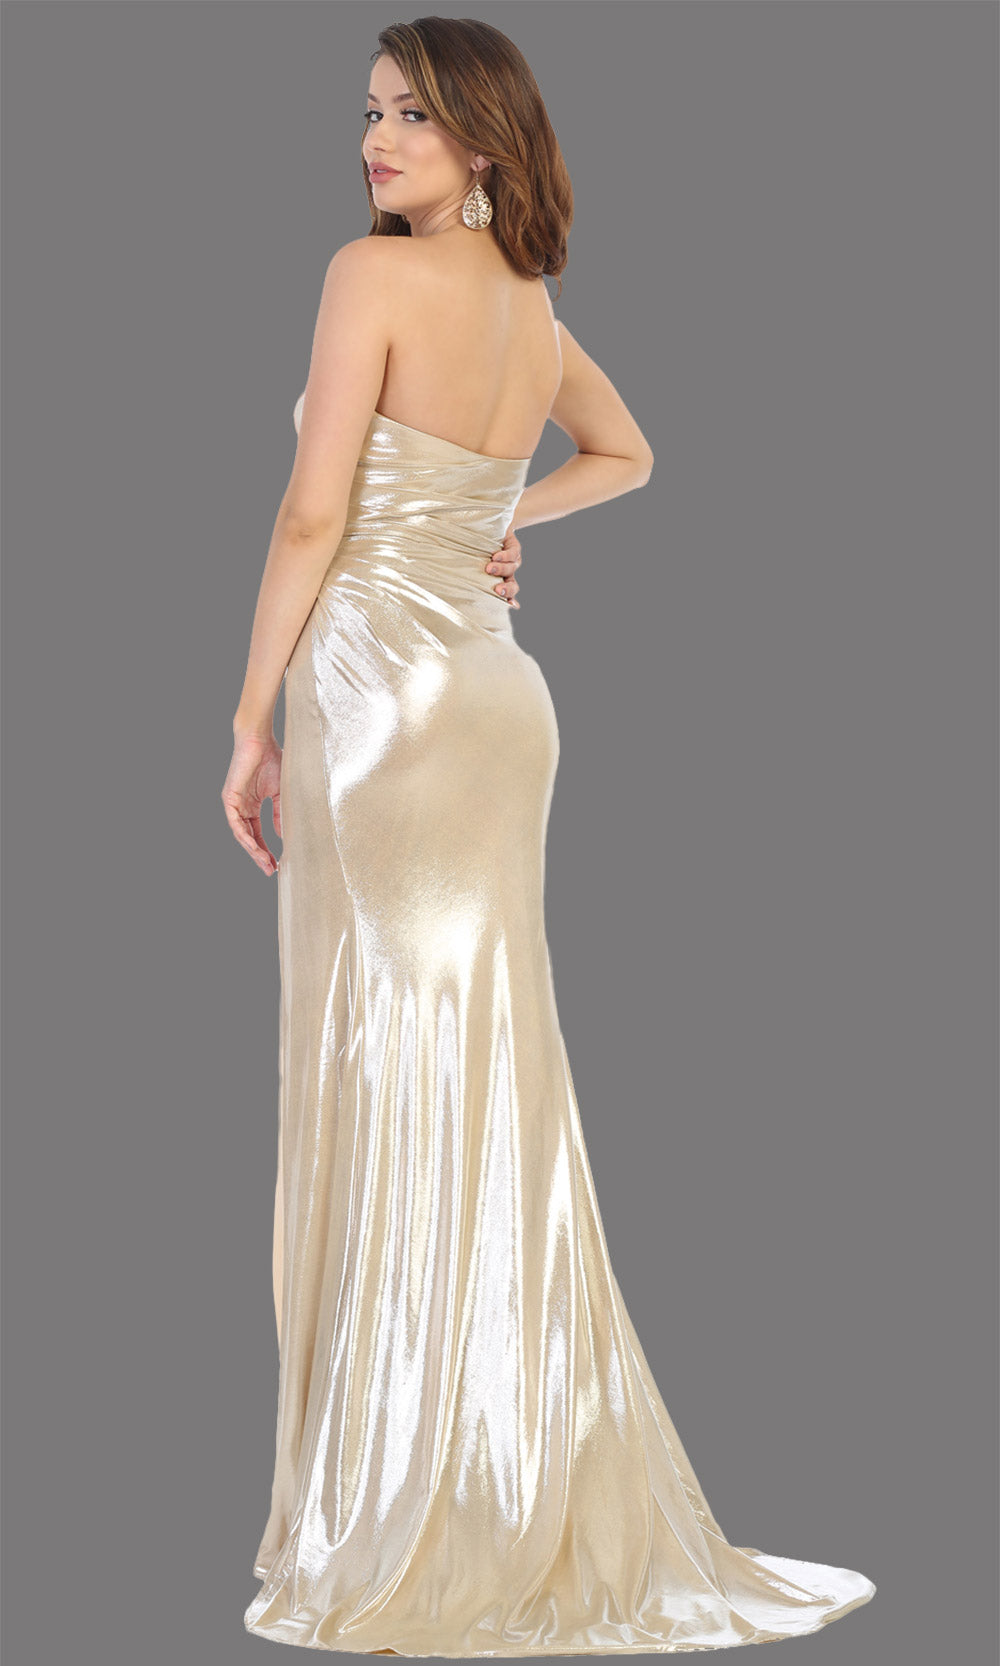 Mayqueen RQ7774 long gold strapless evening fitted metallic dress w/high slit. Full length gold gown is perfect for  enagagement/e-shoot dress, formal wedding guest, indowestern gown, evening party dress, prom, bridesmaid. Plus sizes avail-b.jpg